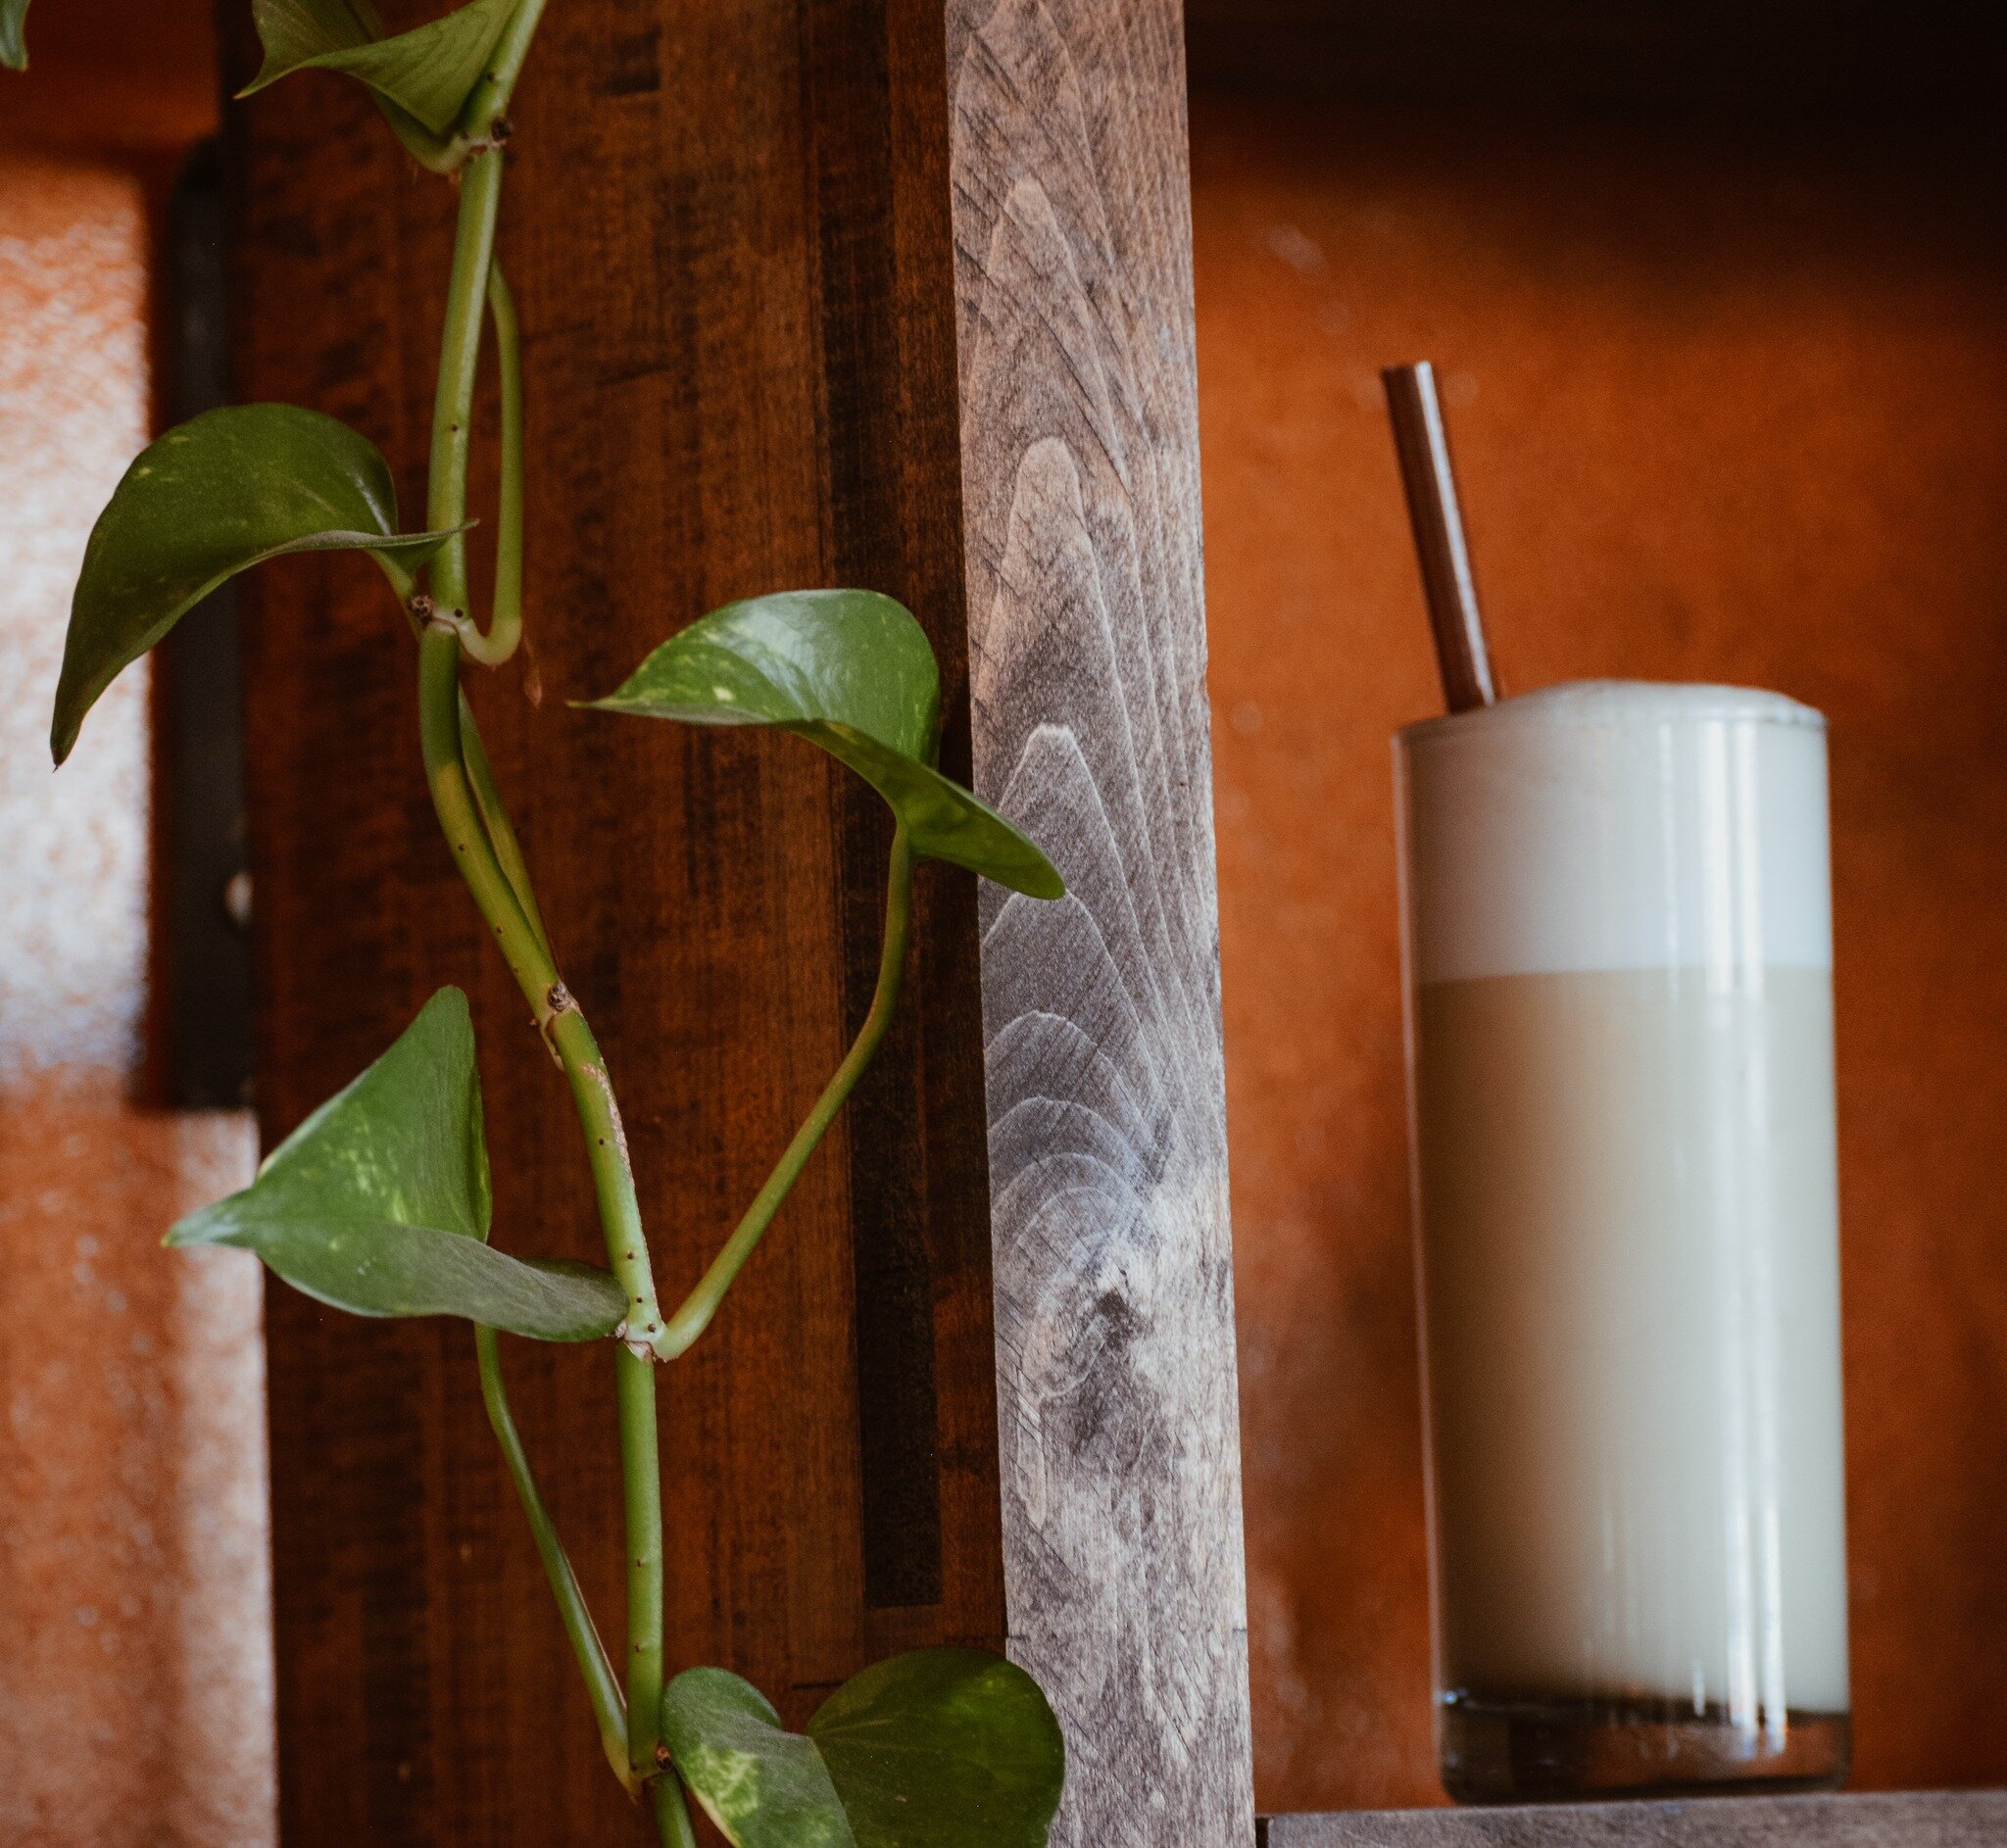 Indulge in the creamy delight of our Pistachio Gin Fizz: Crafted with luscious pistachio syrup, smooth gin, zesty coconut lime, a touch of biscotti liqueur, and the richness of cream. Finished with a velvety egg white froth and a subtle hint of match